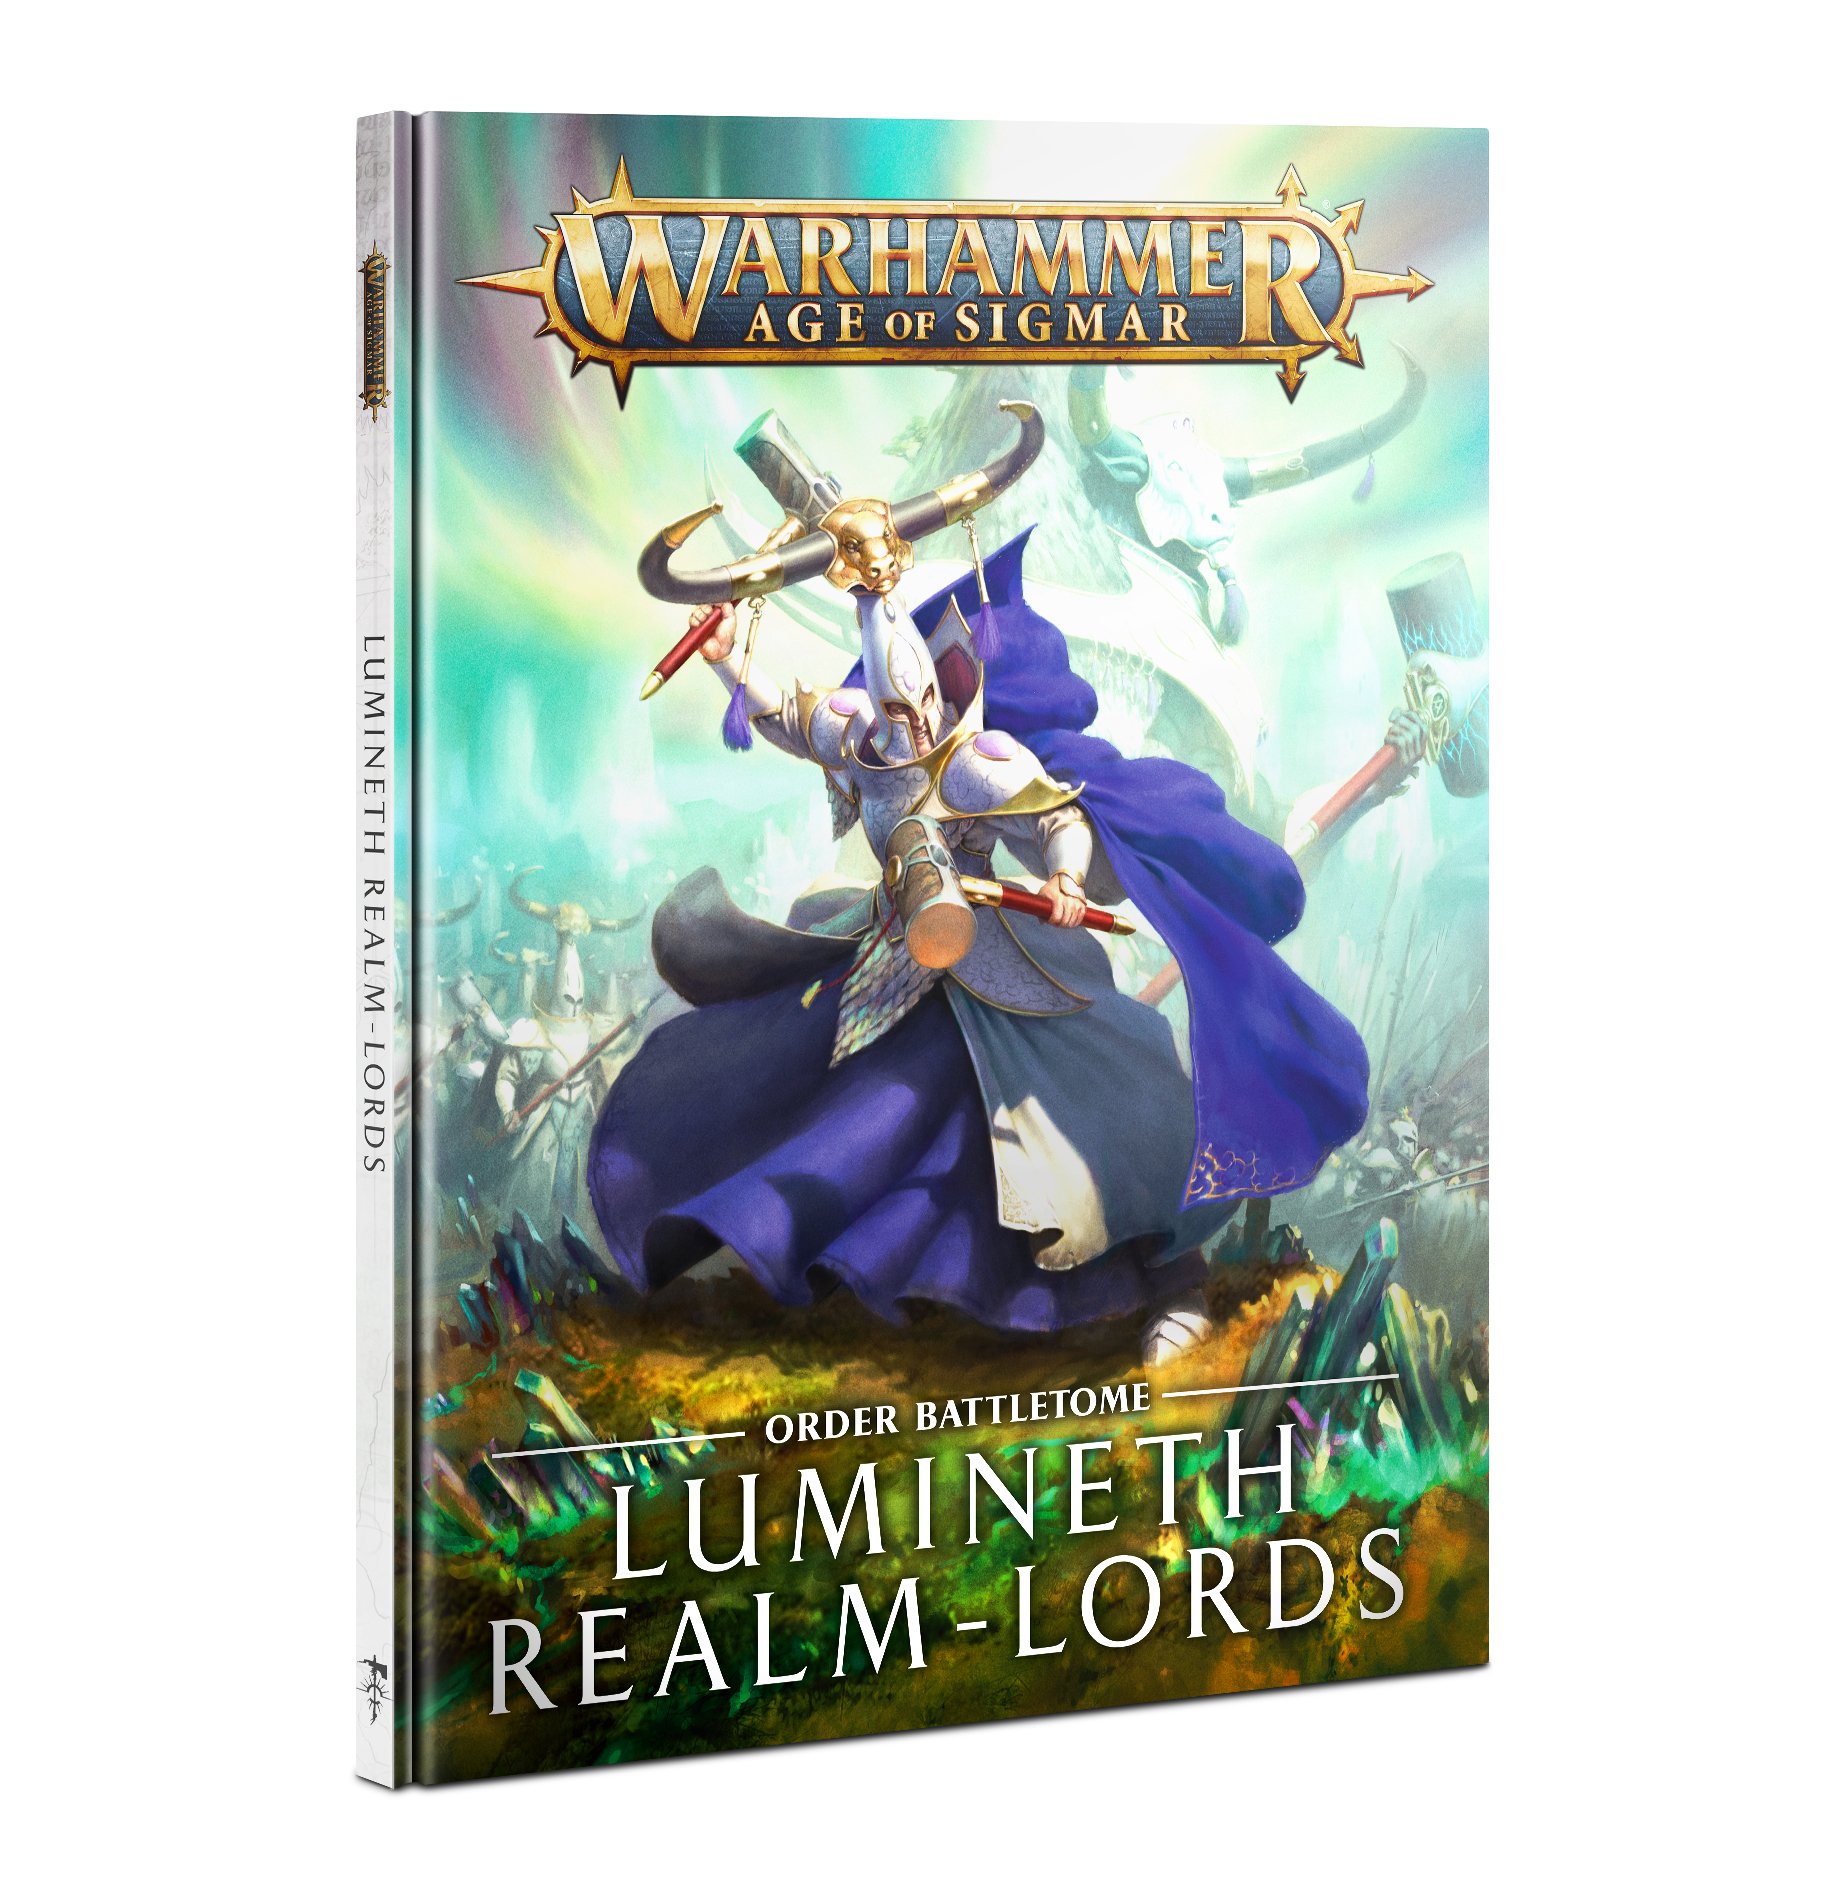 Warhammer Age of Sigmar: Battletome: Lumineth Realm-lords (First Wave 2020 HB) (SALE) 